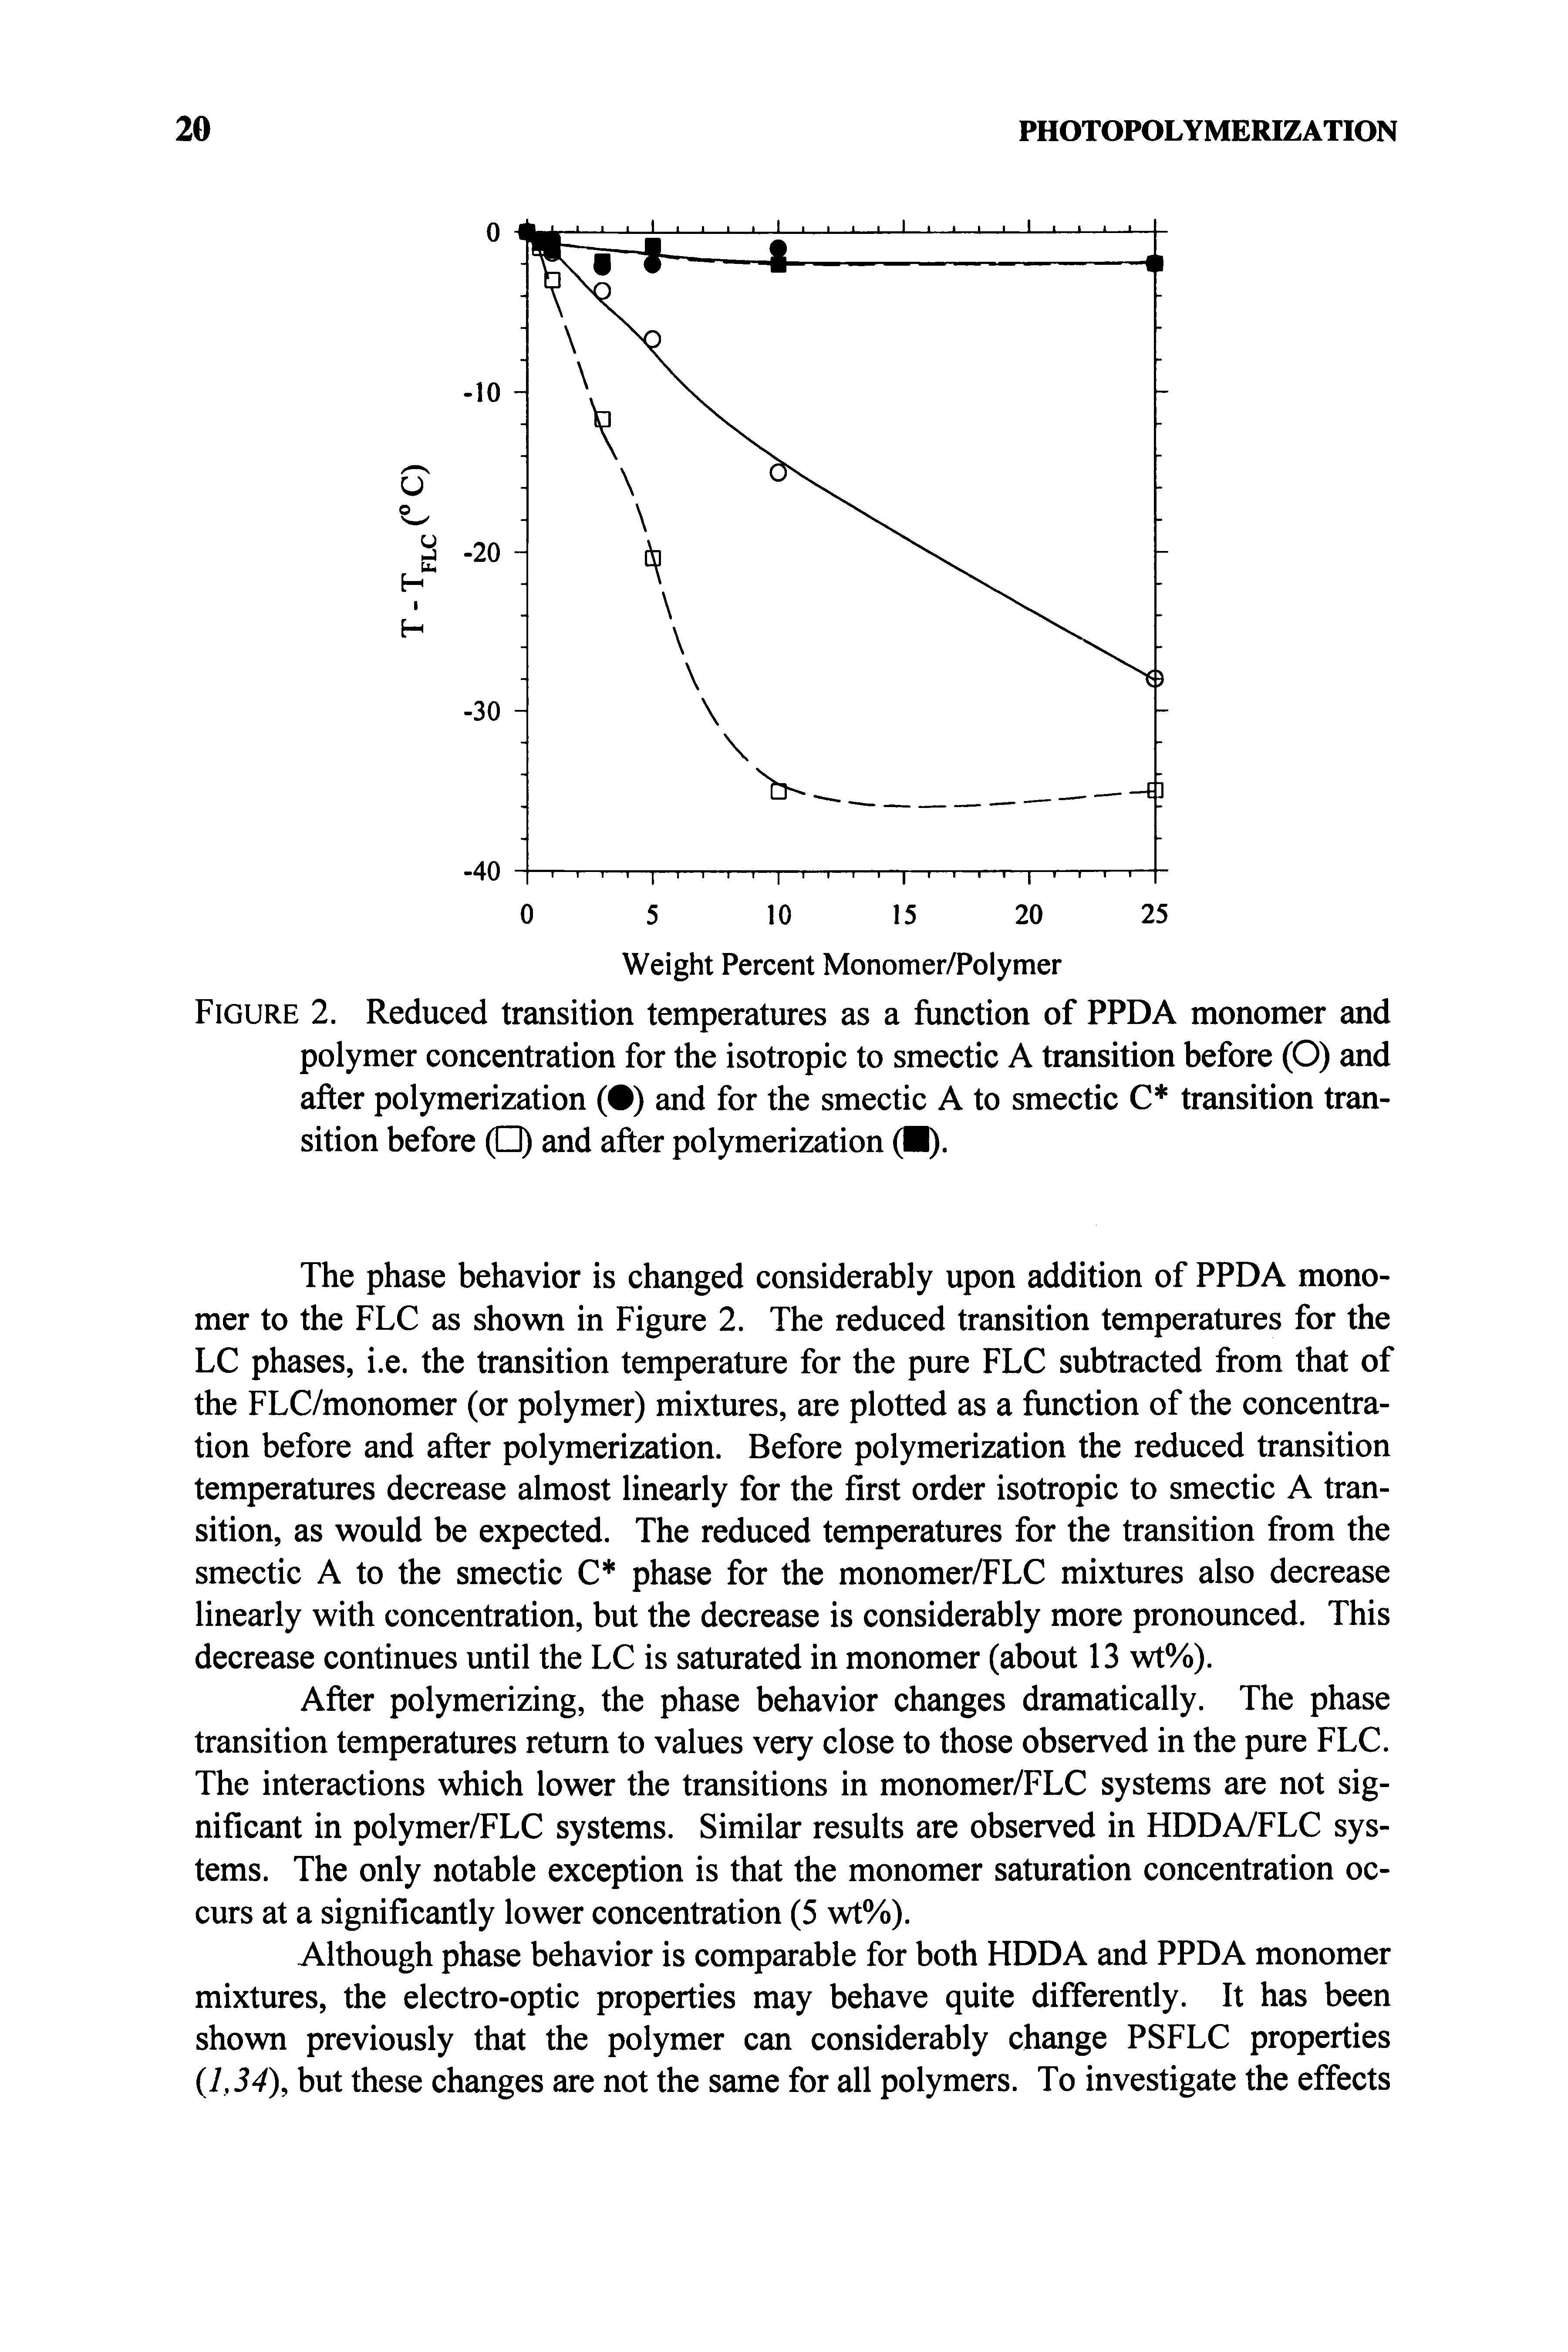 Figure 2. Reduced transition temperatures as a function of PPDA monomer and polymer concentration for the isotropic to smectic A transition before (O) and after polymerization ( ) and for the smectic A to smectic C transition transition before ( ) and after polymerization ( ).